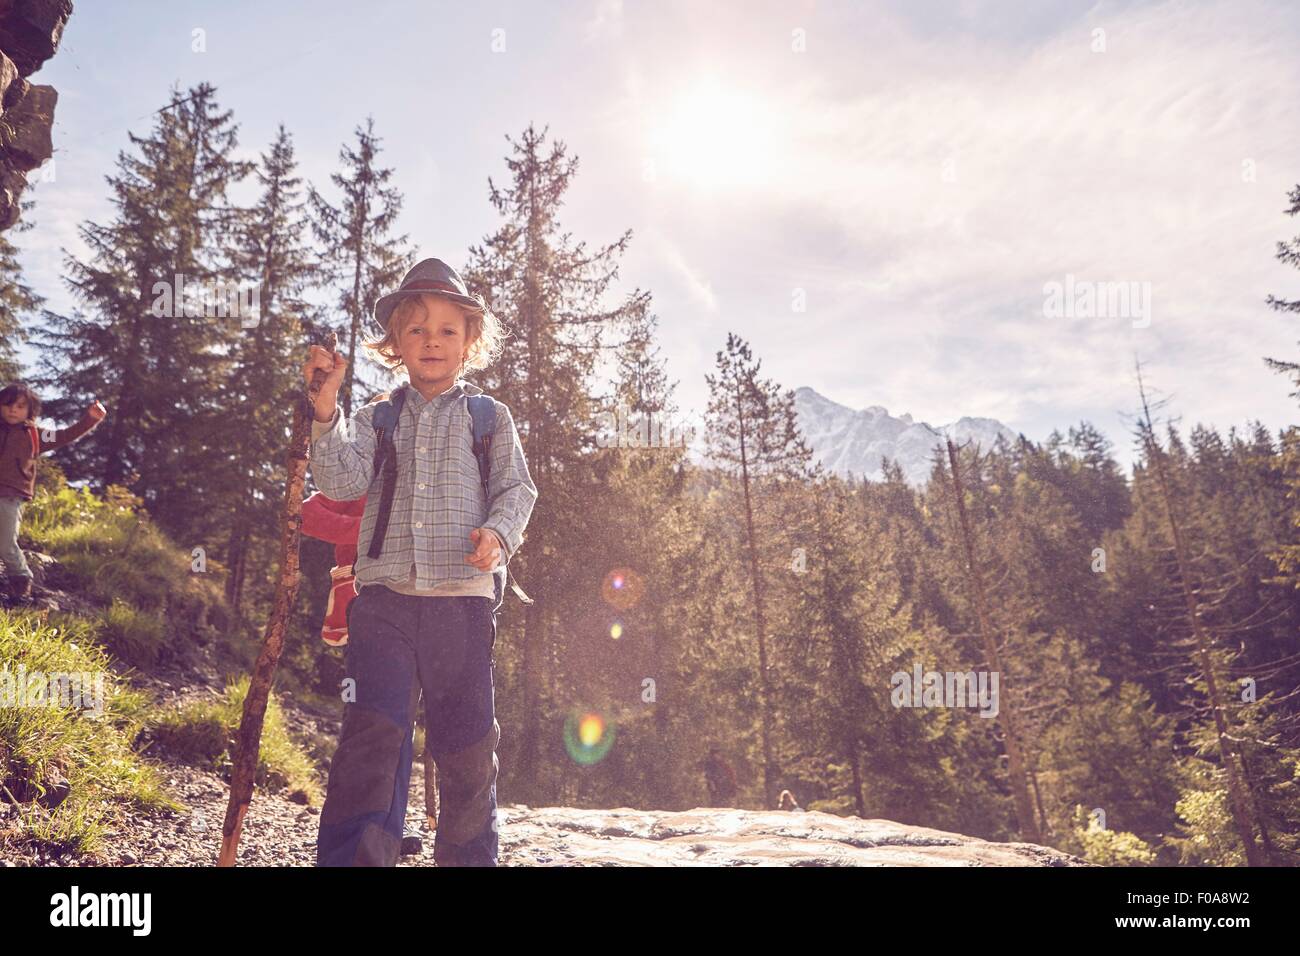 Portrait of young boy standing on rock, in forest Stock Photo